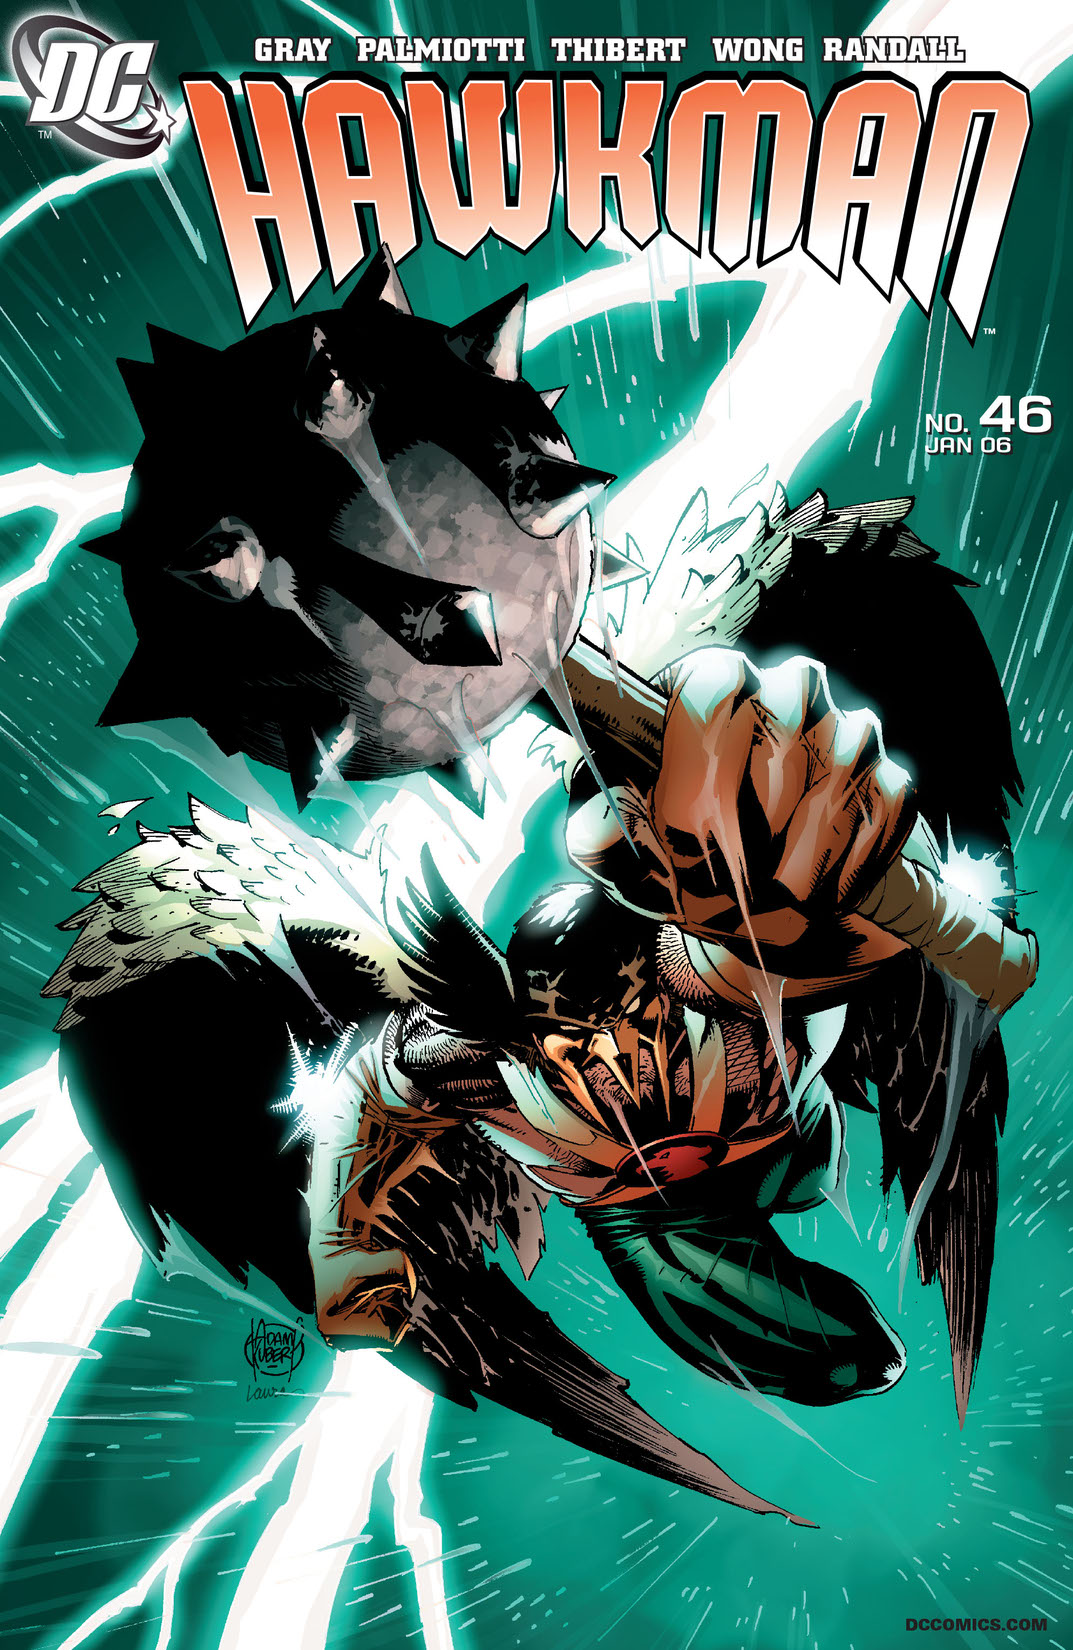 Hawkman (2002-) #46 preview images